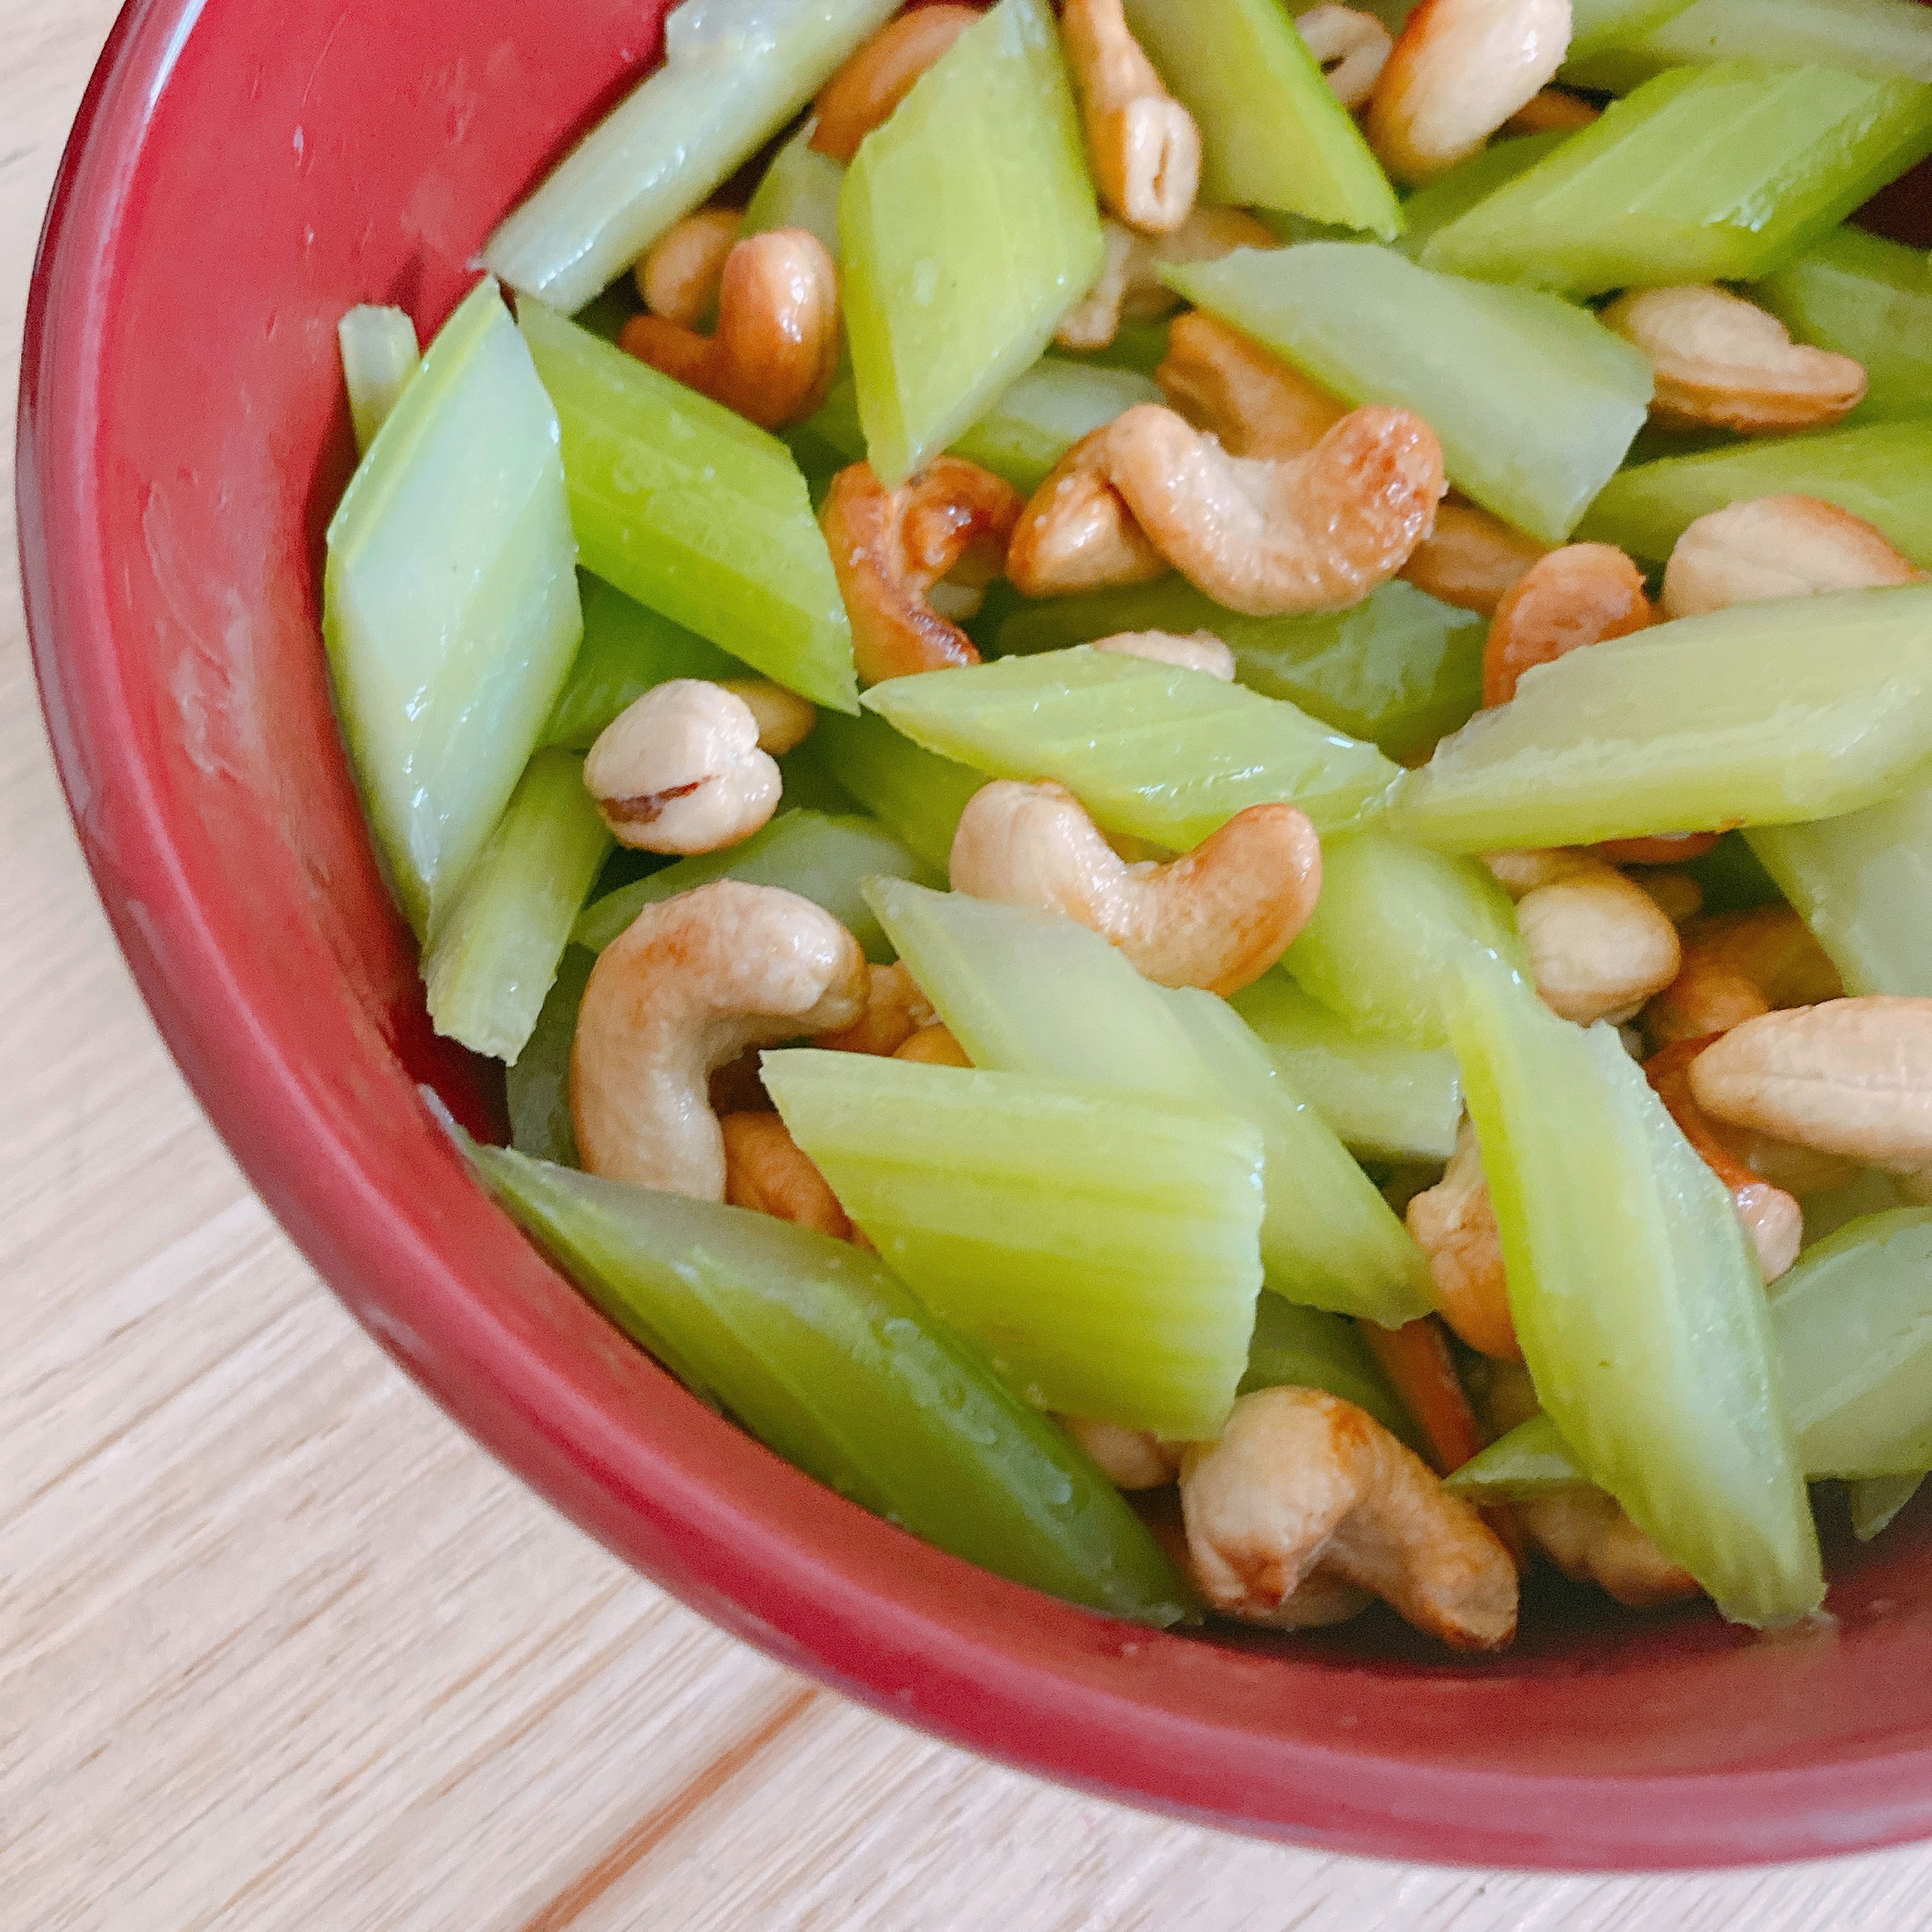 Take the cashews out and use the oil to fry the celery for a minute. Pour the cashews in and add a little salt. Stir for a few seconds and it’s done! Bon appetite!